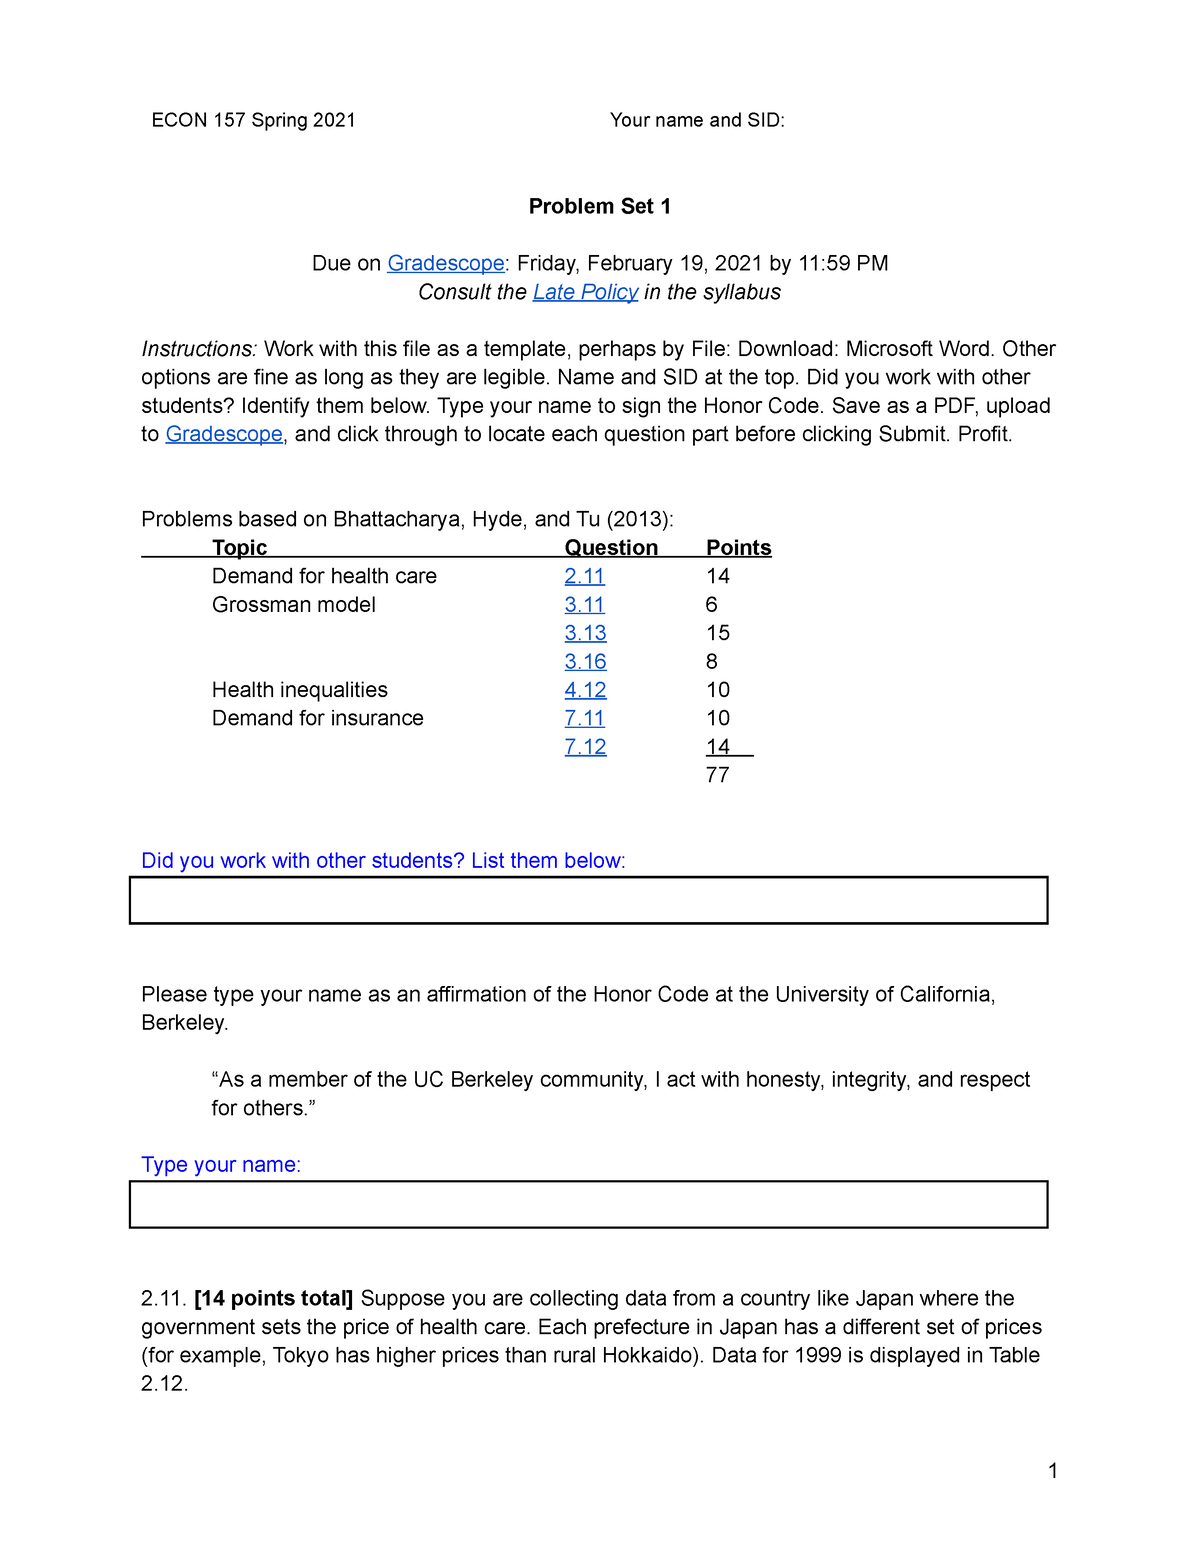 econ-157-s21-problem-set-1-problem-set-1-due-on-gradescope-friday-february-19-2021-by-11-59